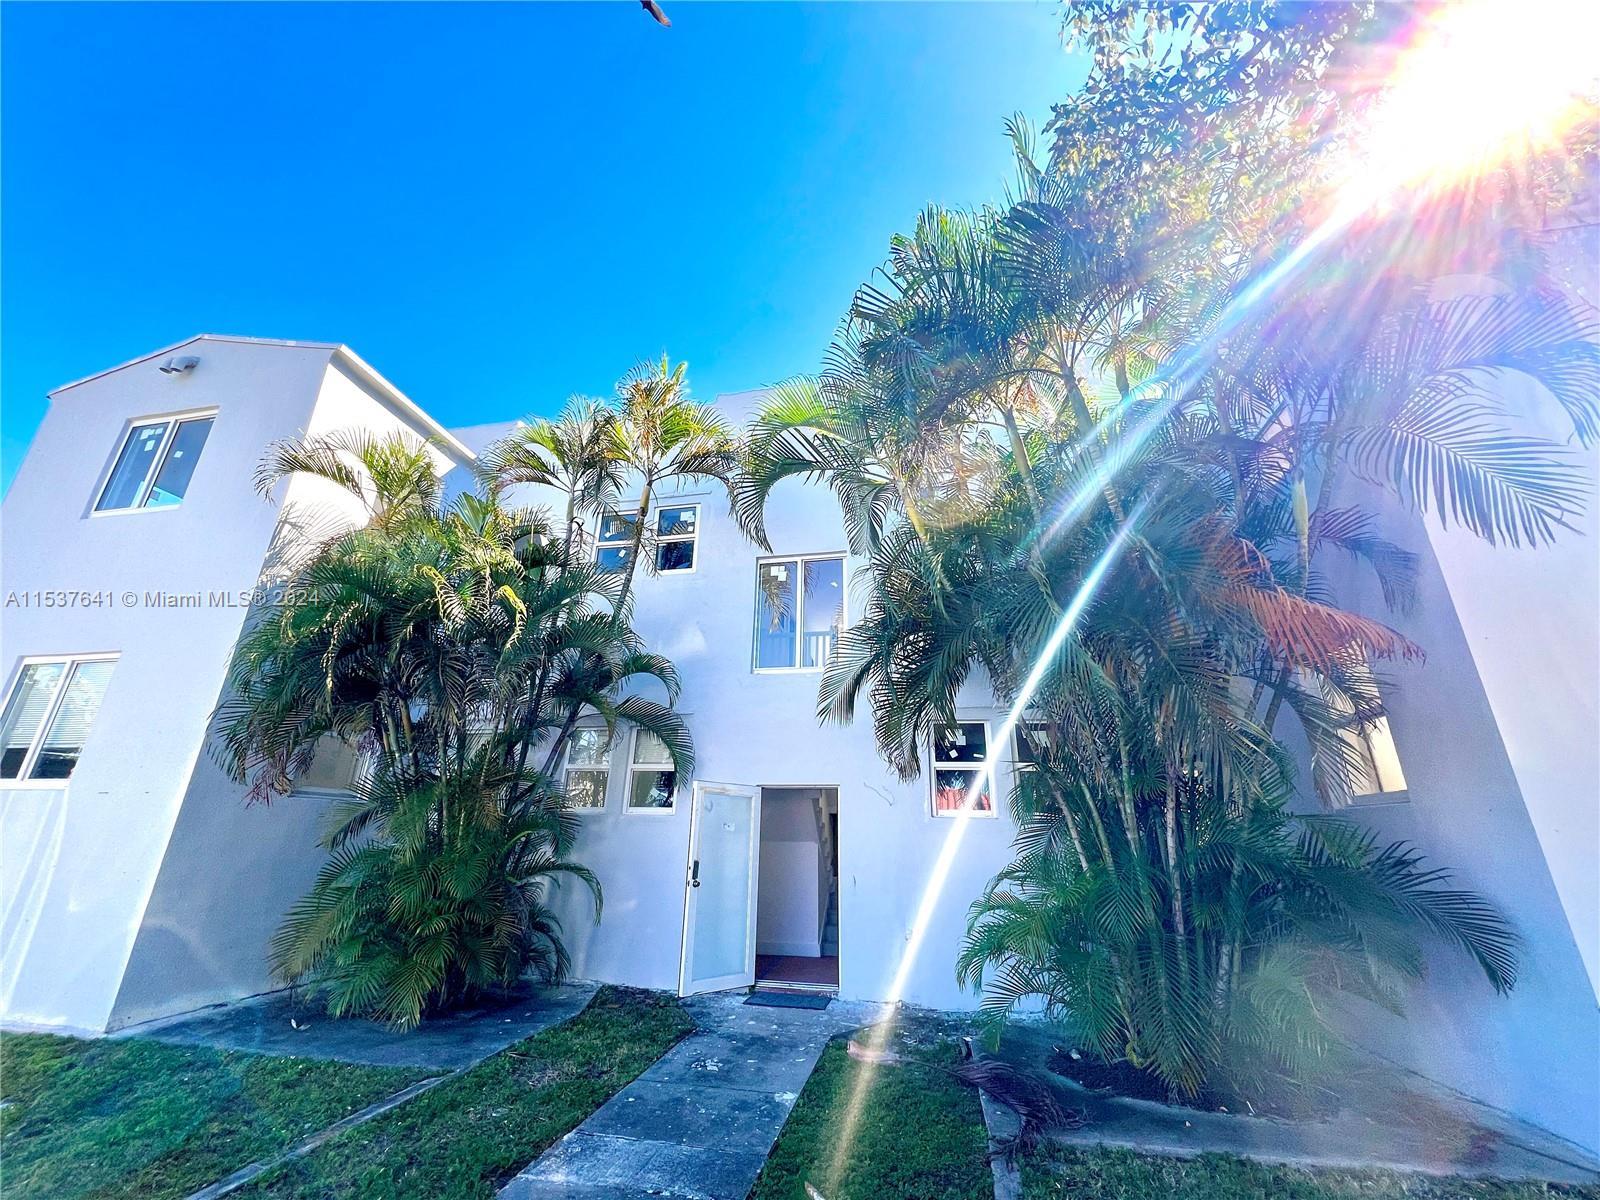 Photo of 1015 S 17th Ave #4 in Hollywood, FL